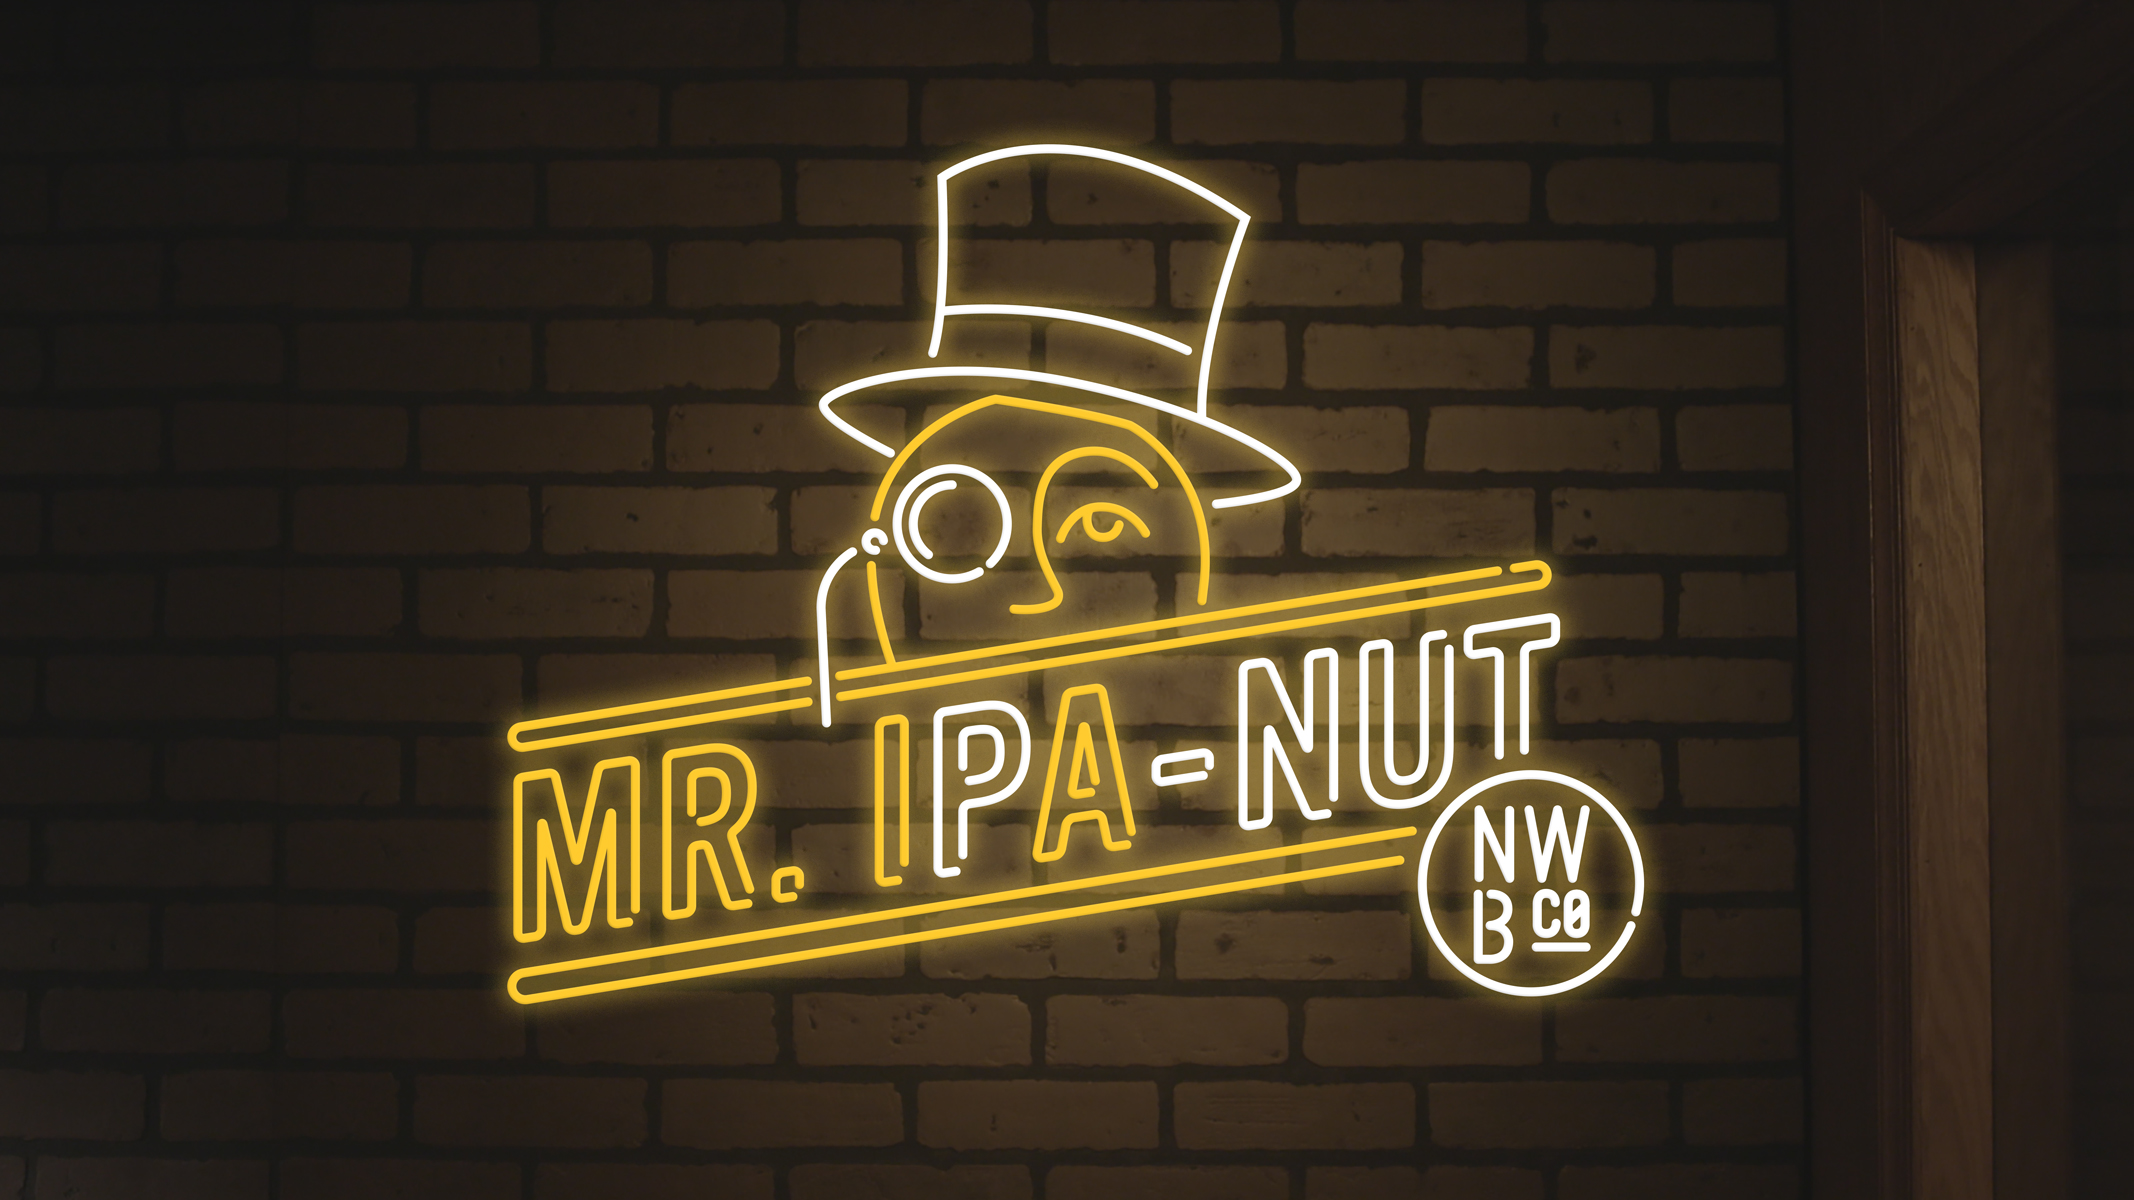 Planters Brews a Peanut IPA with Noon Whistle Brewing